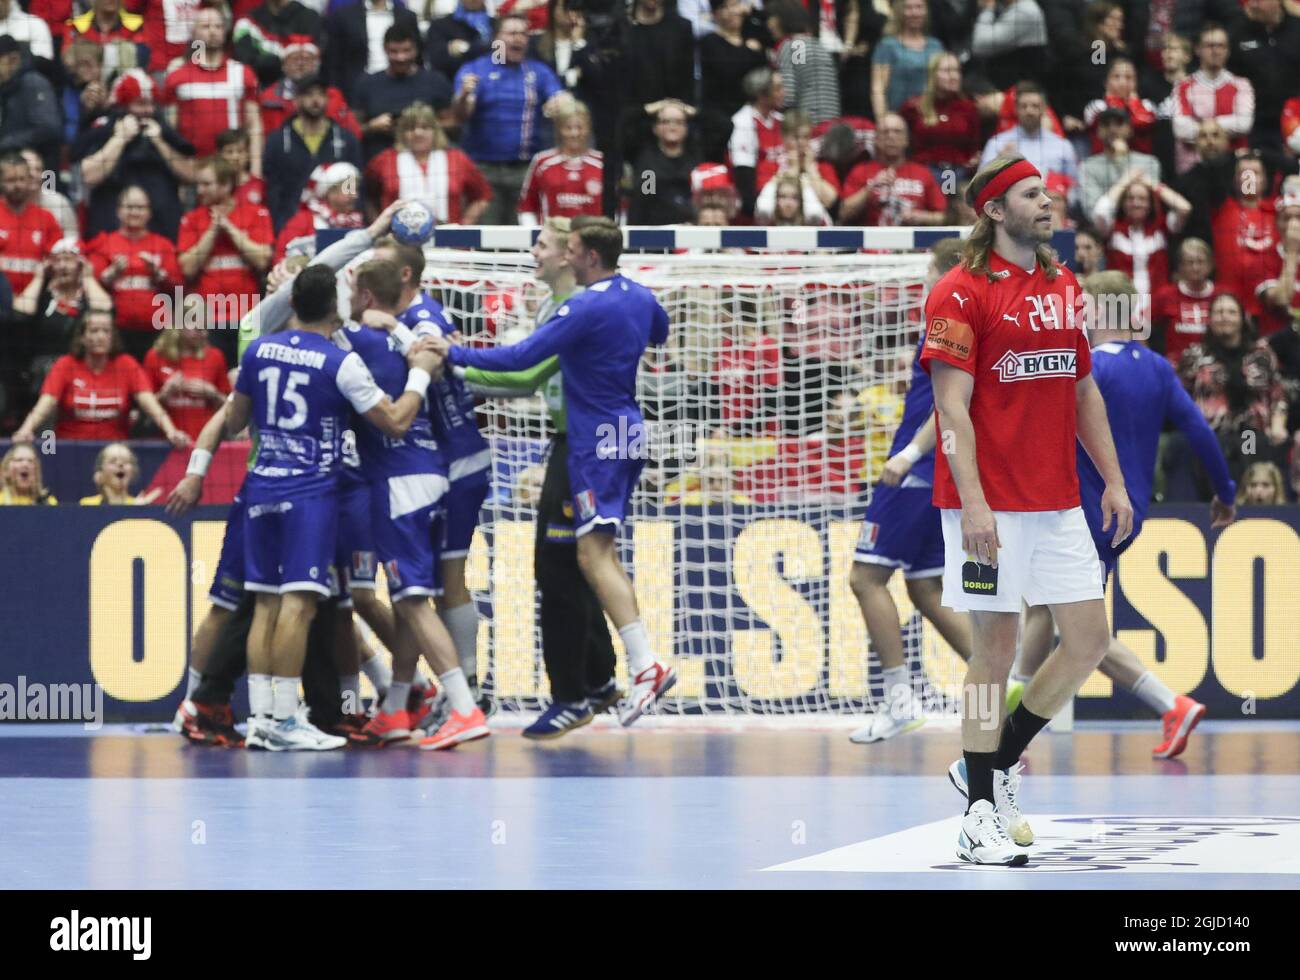 MALMO 20200111 Players of Iceland celebrate their wictory Mikkel Hansen dejected (R) during the Men's EHF EURO 2020 Handball group E match preliminary round between Denmark and Iceland in Malmo Arena